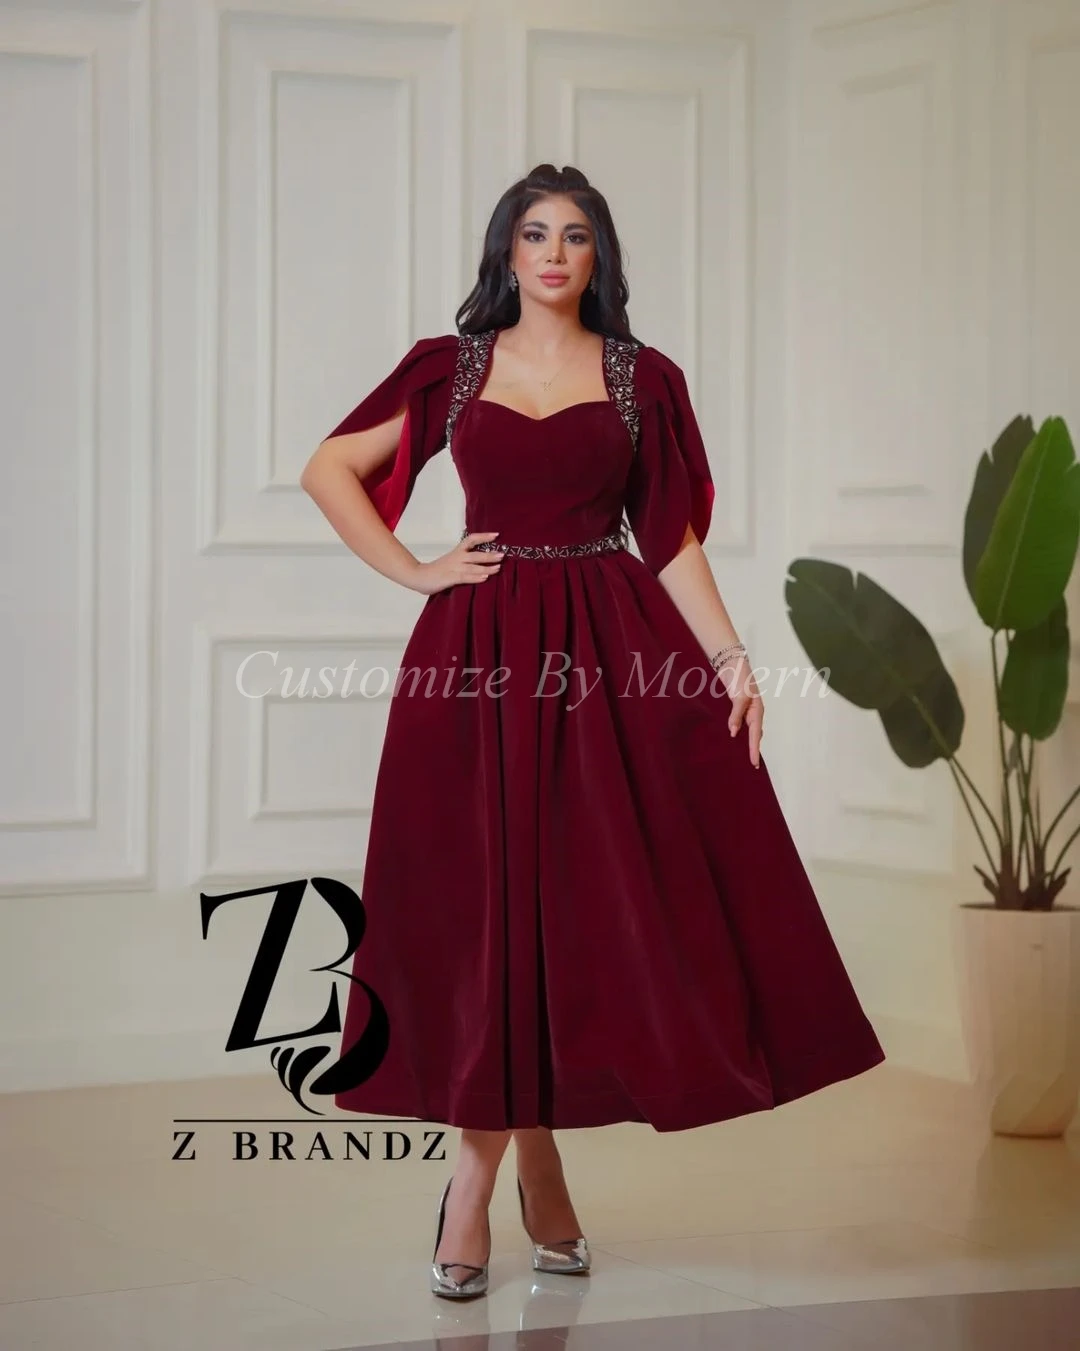 

Dark Red Short Sleeves Prom Dresses A-Line Sweetheart Beadings Ankle Length Saudi Arabic Women Eveing Gowns Formal Party